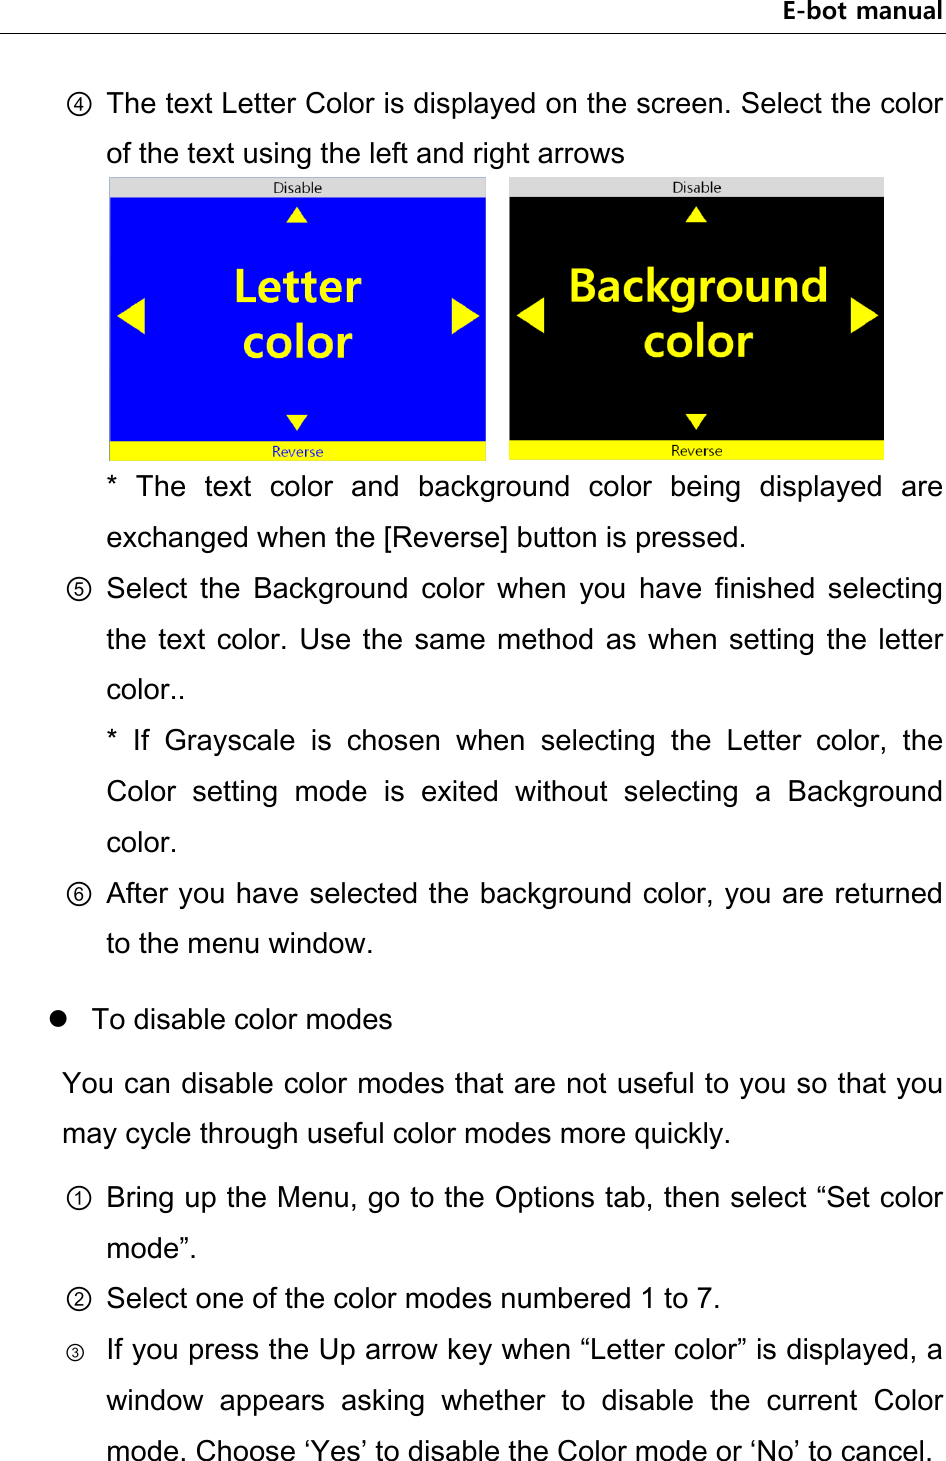 E-bot manual ④ The text Letter Color is displayed on the screen. Select the color of the text using the left and right arrows       *  The  text  color  and  background  color  being  displayed  are exchanged when the [Reverse] button is pressed. ⑤ Select  the  Background  color  when  you  have  finished  selecting the text  color.  Use the same  method as when setting  the letter color..   *  If  Grayscale  is  chosen  when  selecting  the  Letter  color,  the Color  setting  mode  is  exited  without  selecting  a  Background color. ⑥ After you have selected the background color, you are returned to the menu window.  To disable color modes You can disable color modes that are not useful to you so that you may cycle through useful color modes more quickly. ① Bring up the Menu, go to the Options tab, then select “Set color mode”. ② Select one of the color modes numbered 1 to 7. ③ If you press the Up arrow key when “Letter color” is displayed, a window  appears  asking  whether  to  disable  the  current  Color mode. Choose ‘Yes’ to disable the Color mode or ‘No’ to cancel. 